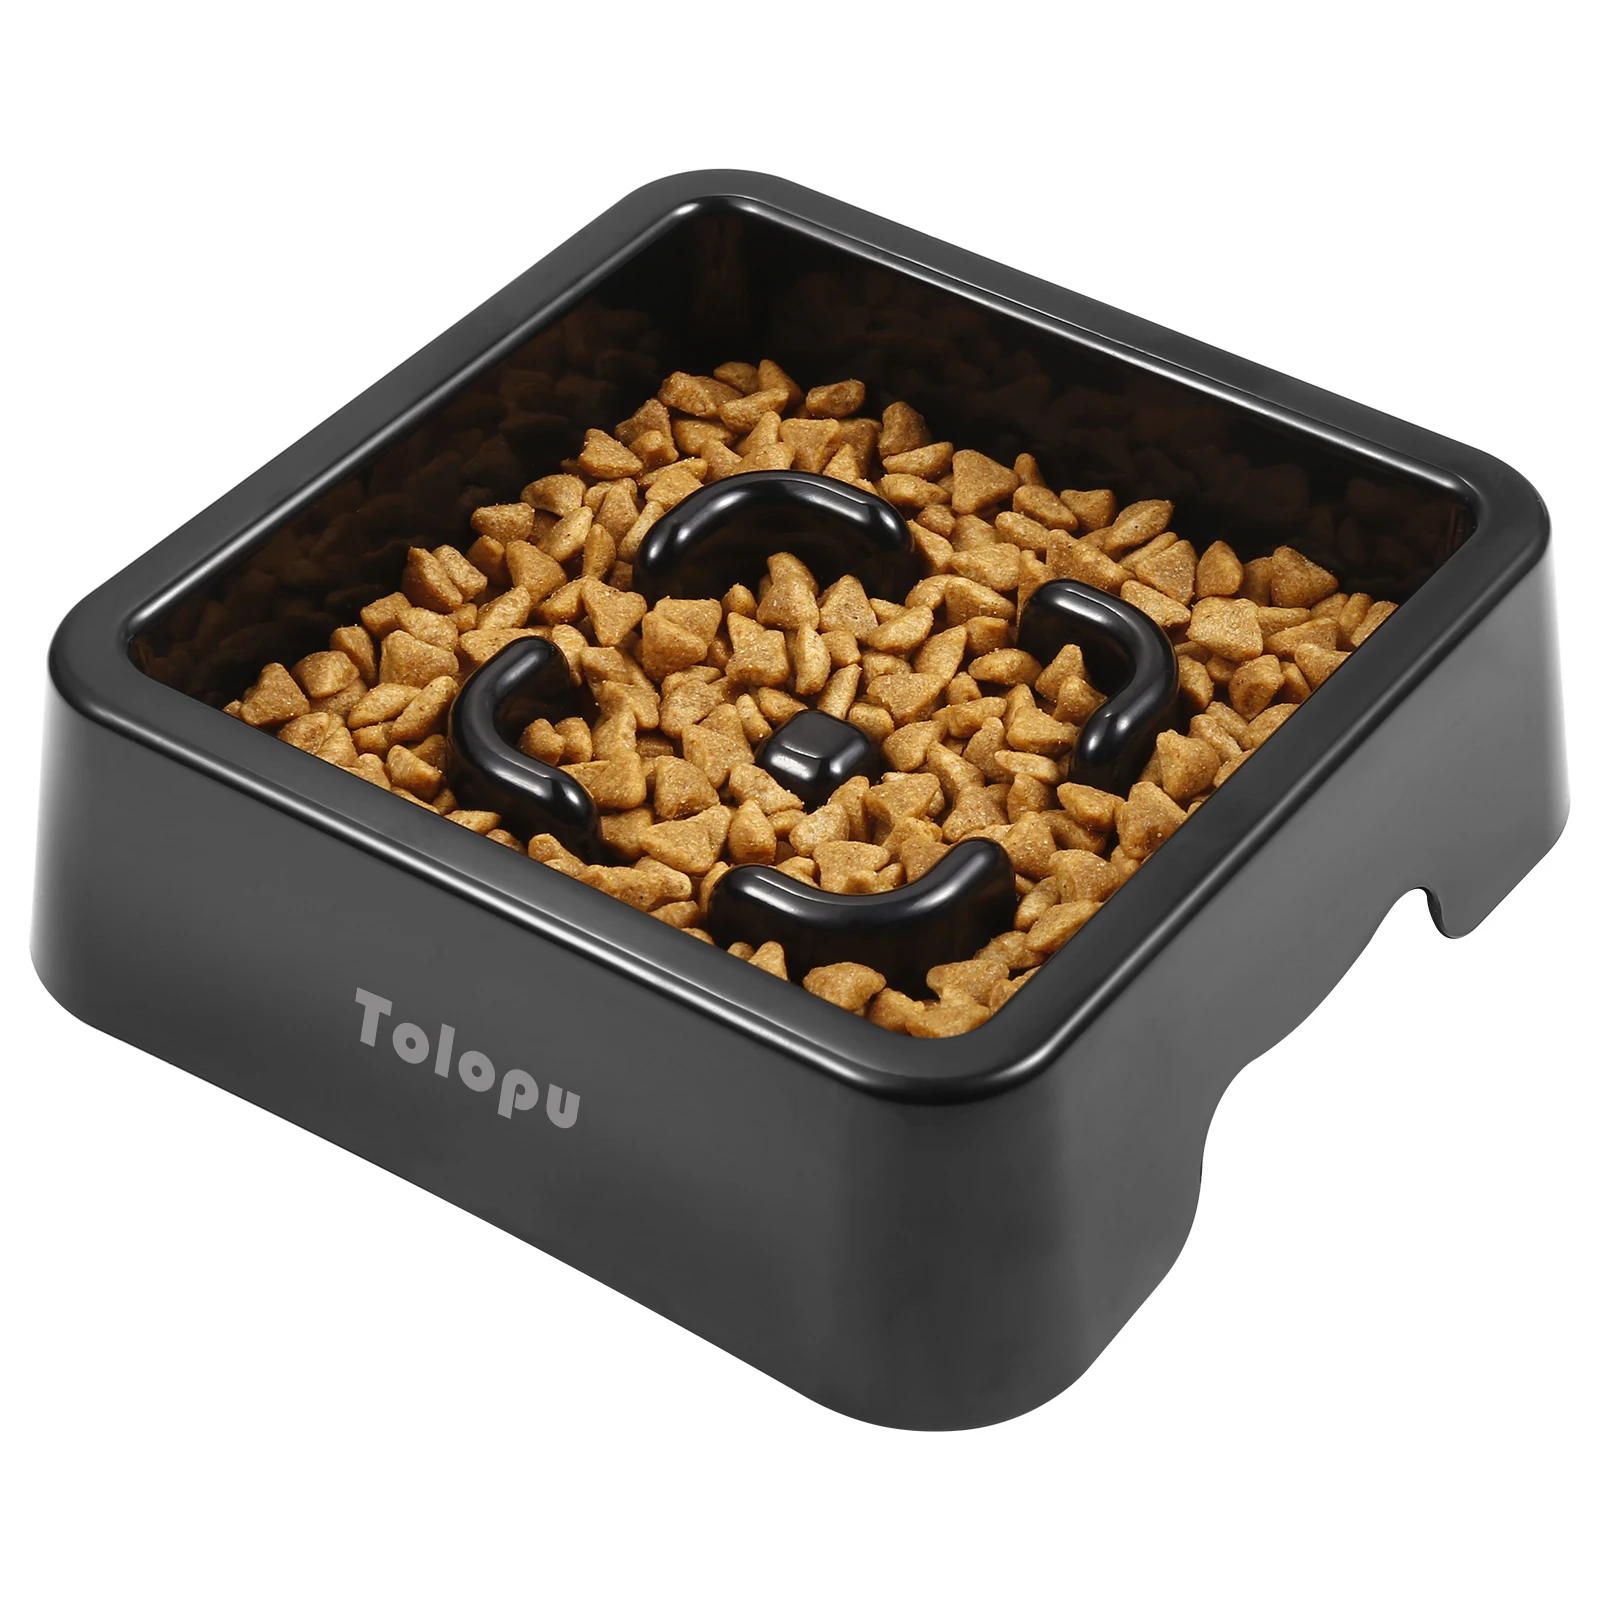 

TOLOPU Free Shipping ABS High Quality Pet slow Feeder Bowl Fashion Slow Feeder Healthy and Prevent Obesity Pet Food Bowl